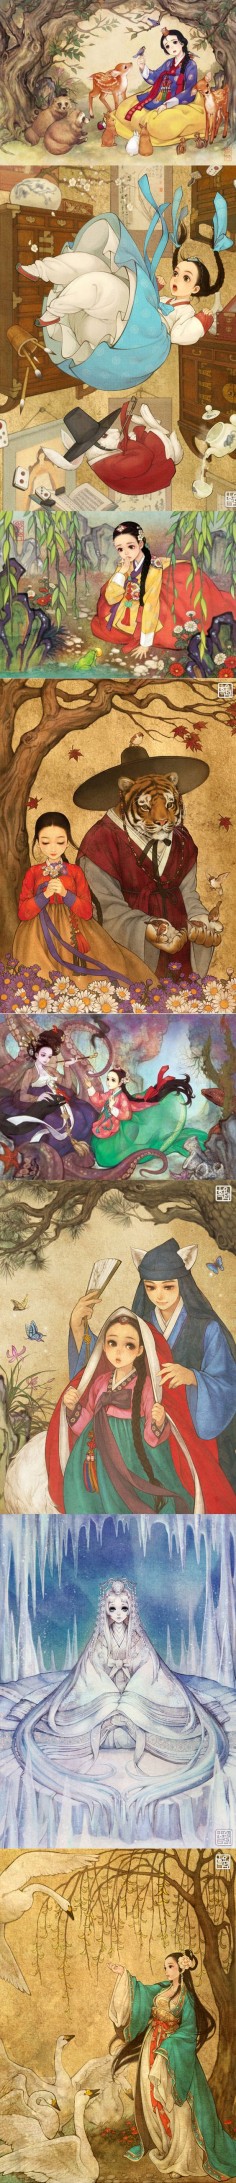 Korean illustrator, Na Young Wu (also known as @00obsidian00 on Twitter), gives Western fairy tales a whimsical Eastern makeover ~ Snow White, Alice in Wonderland, Princess and the Frog, Beauty and the Beast, Little Mermaid, Little Red Riding Hood, Frozen, and Swan Princess.